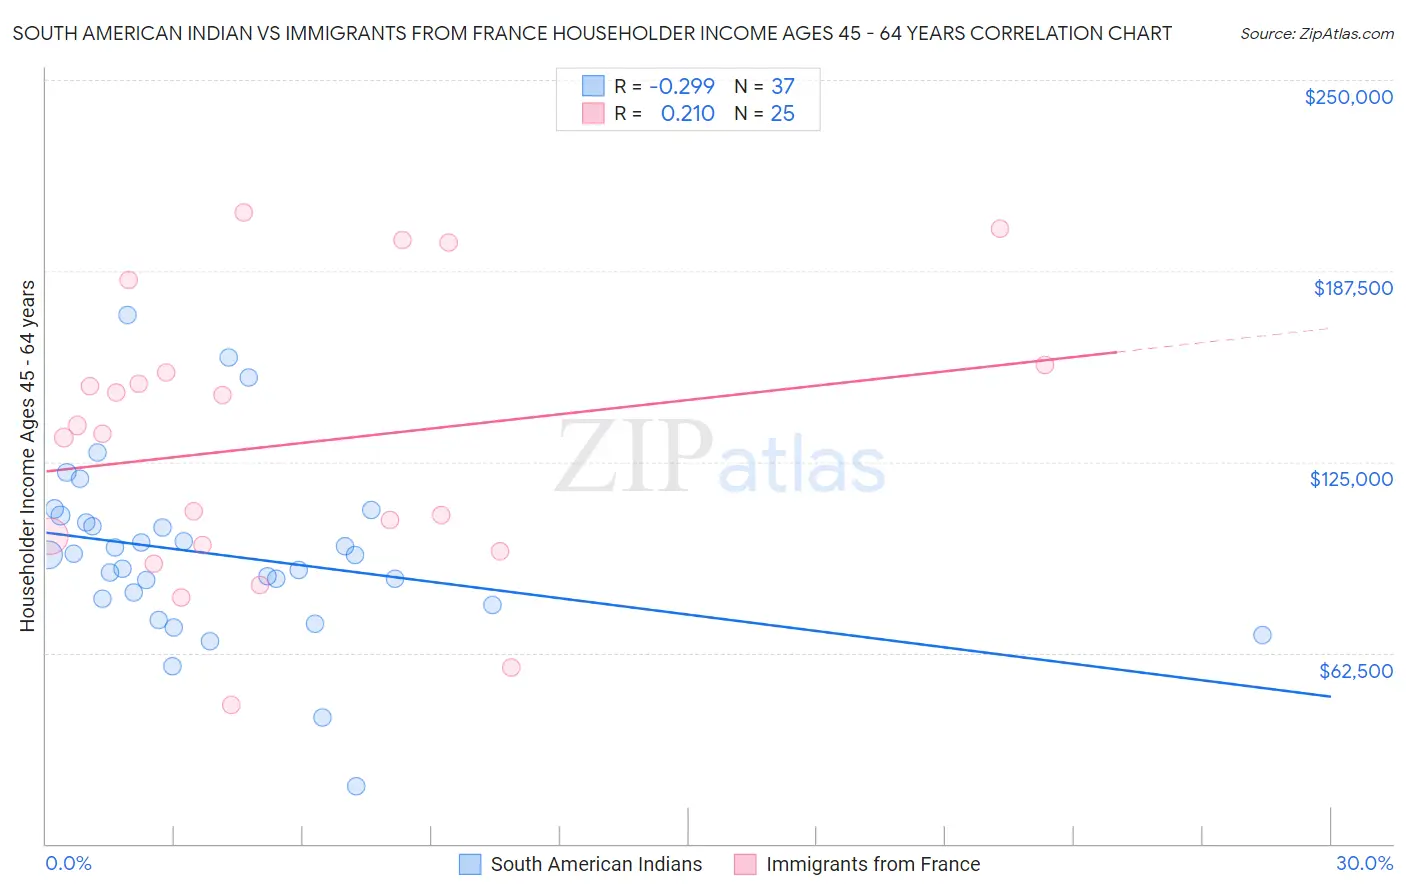 South American Indian vs Immigrants from France Householder Income Ages 45 - 64 years